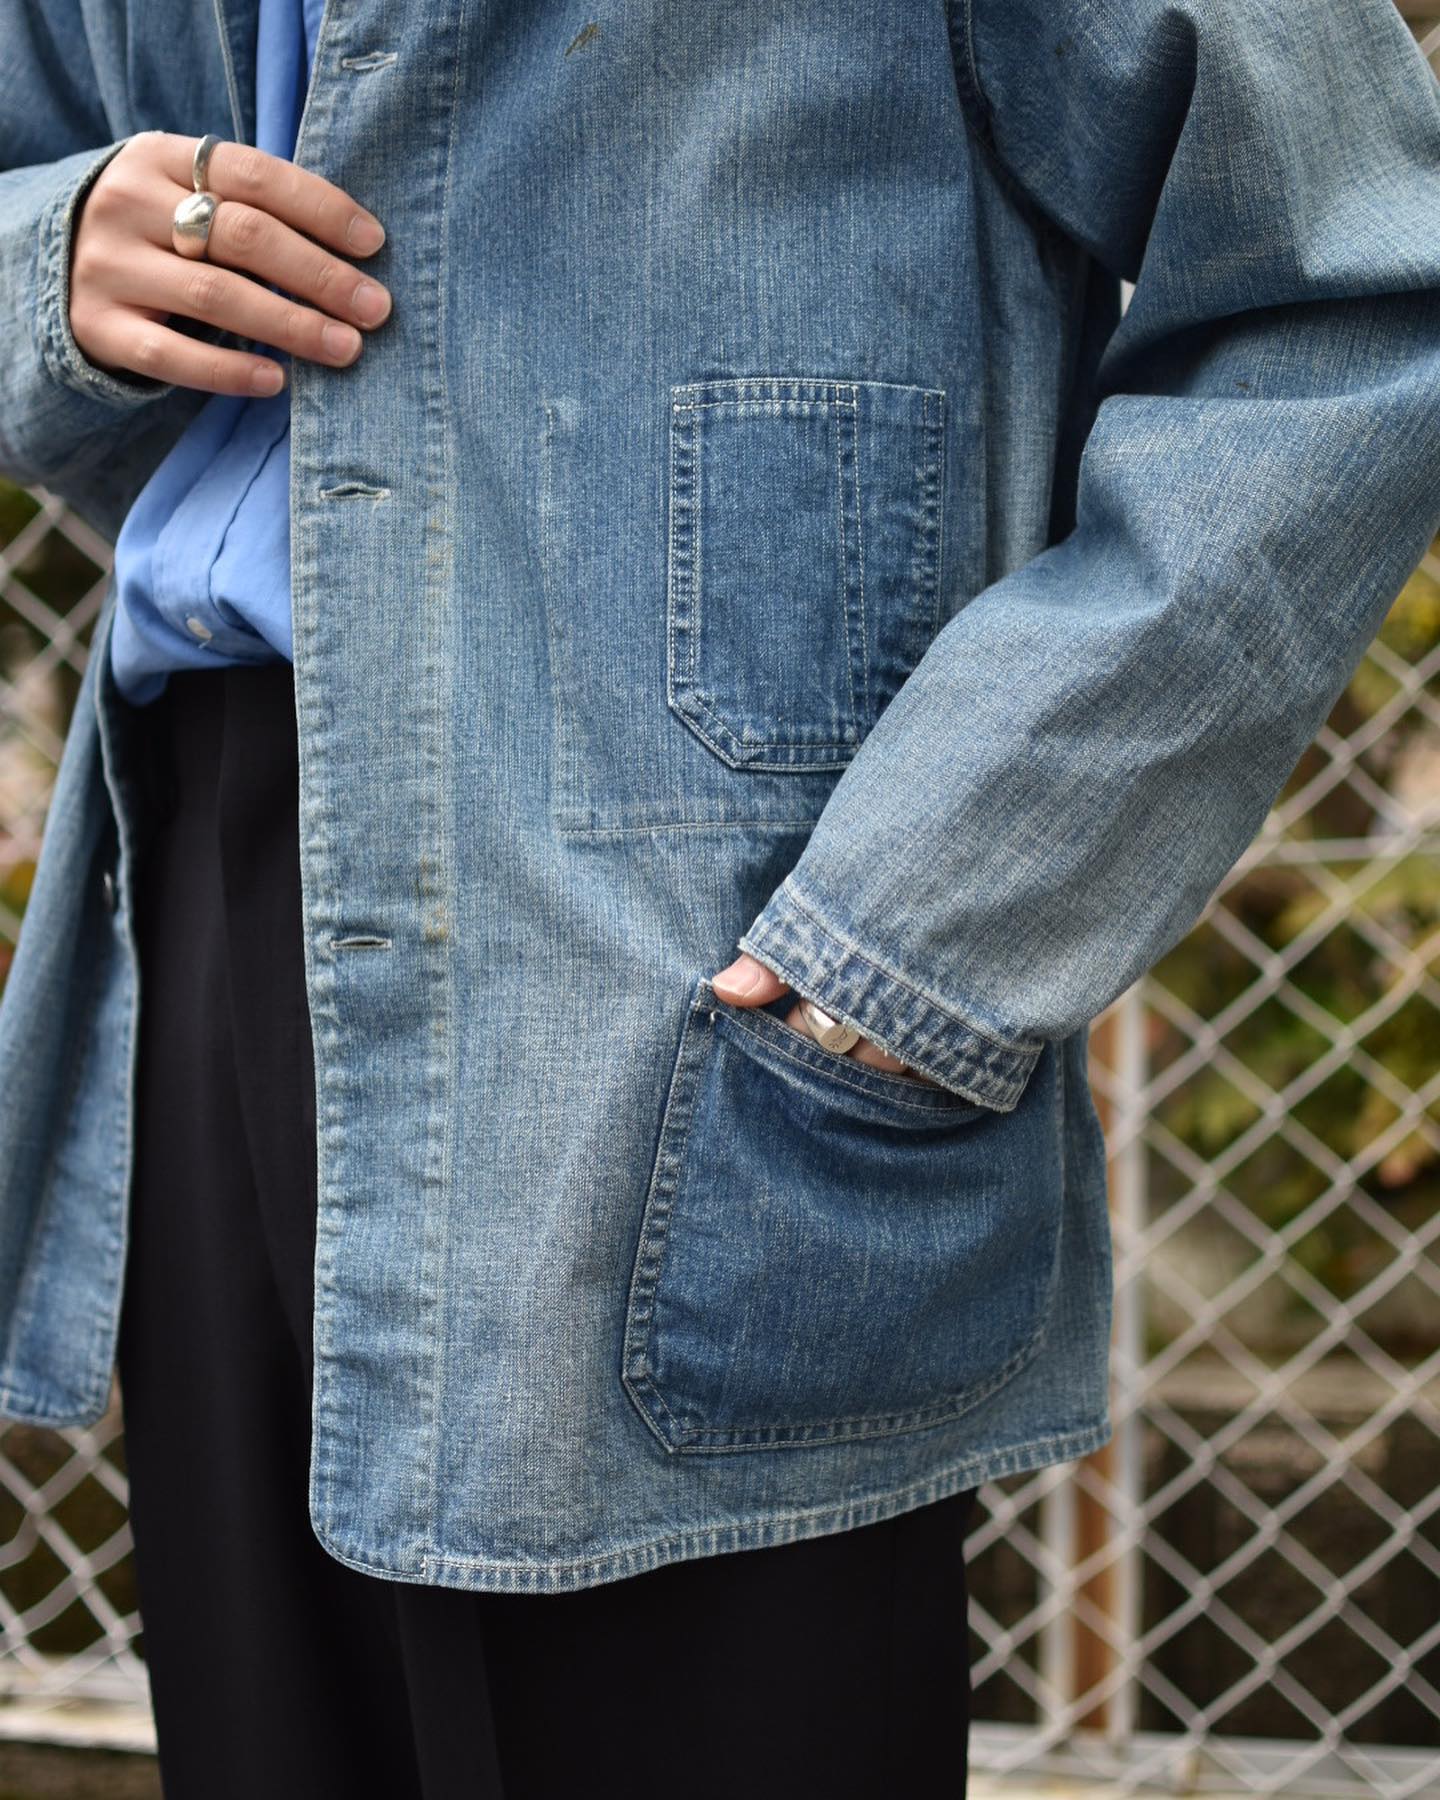 A.PRESSE(アプレッセ) / nknown Vintage Denim Coverall | 公式通販 